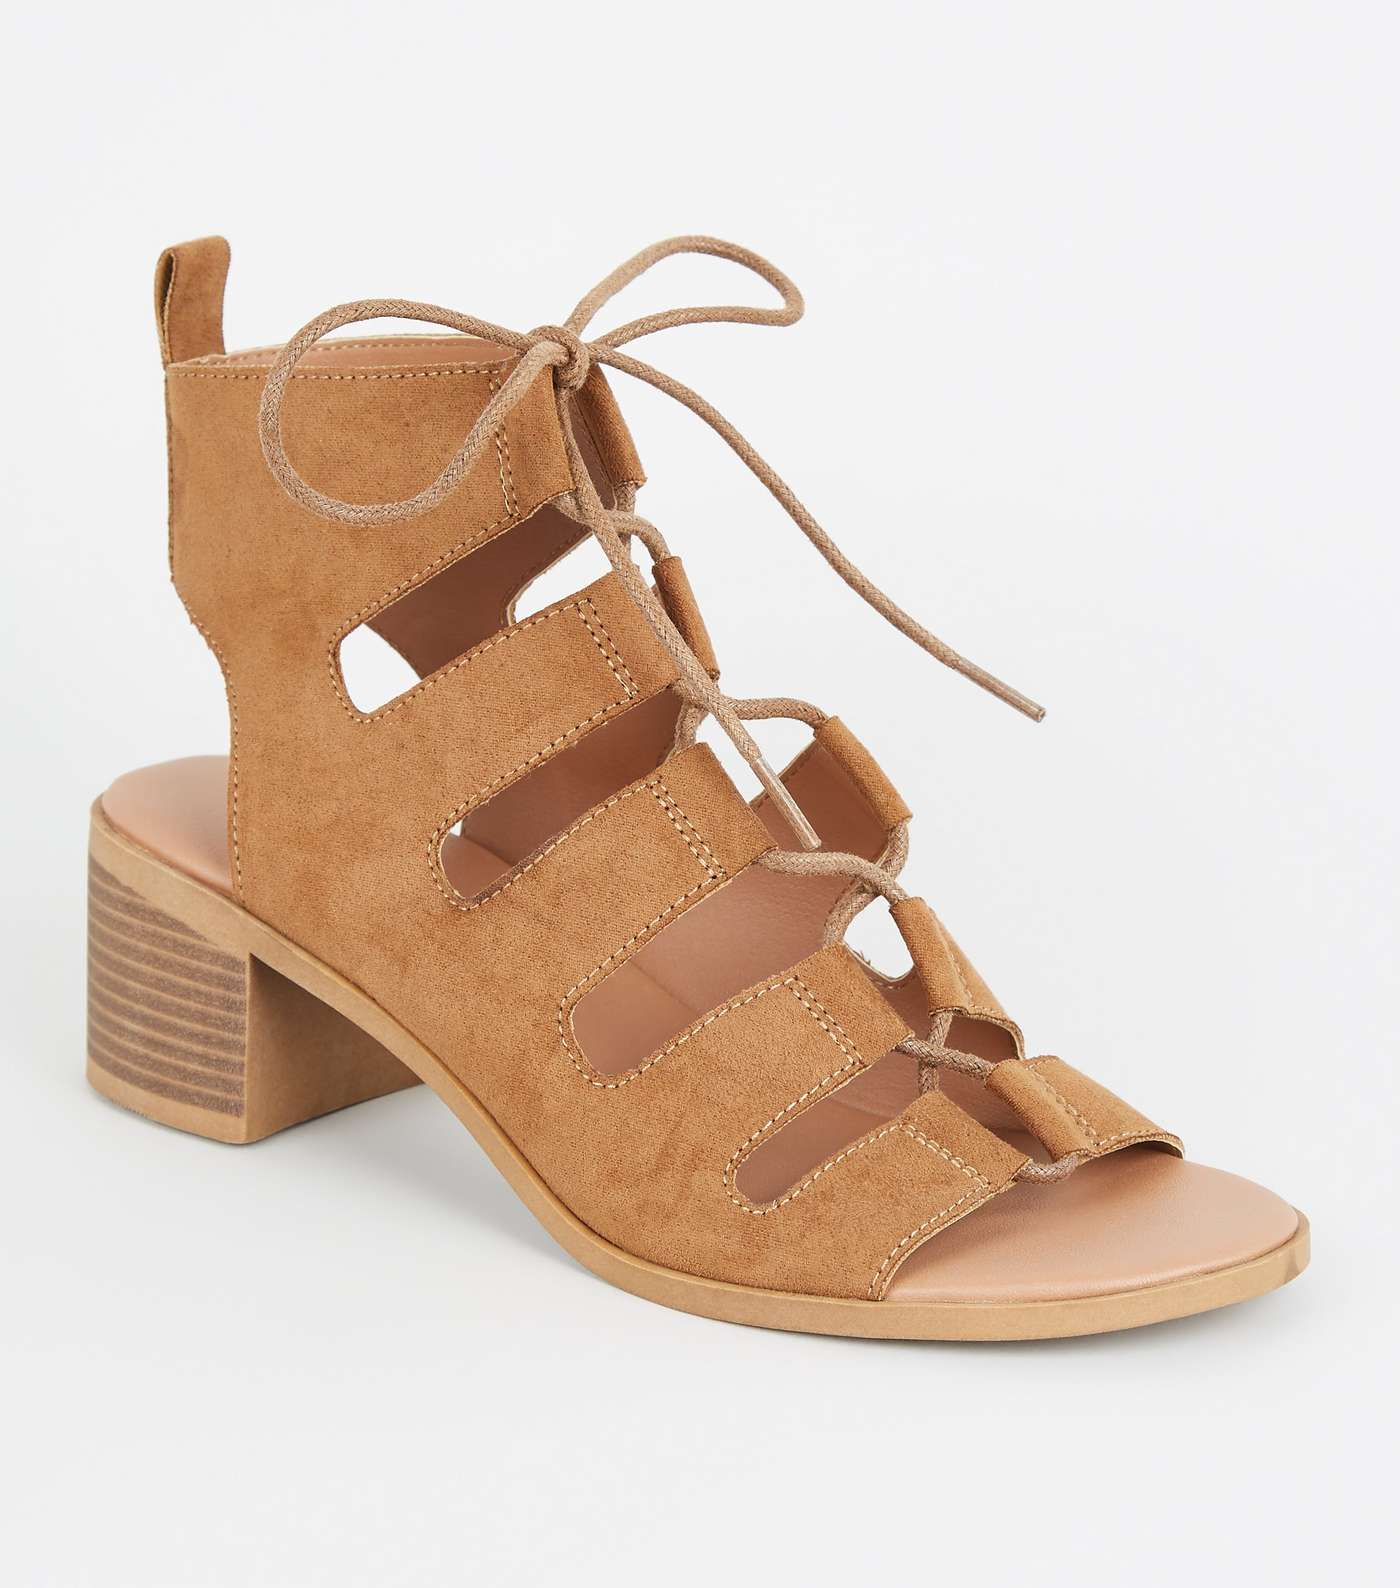 Tan Ghillie Lace Up Low Heel Sandals